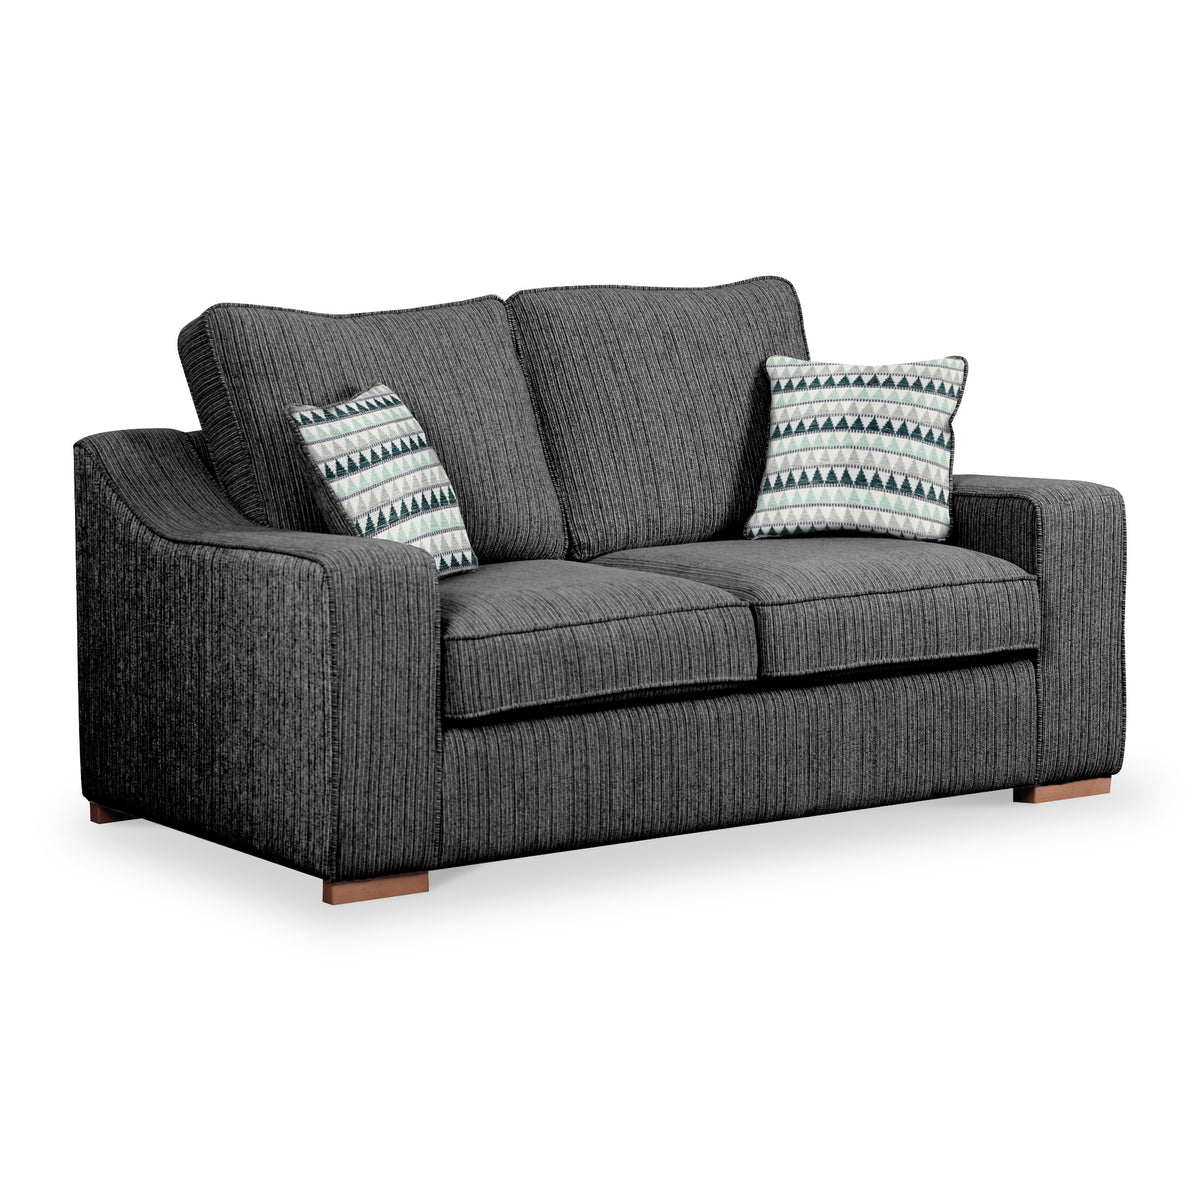 Ashow Charcoal 2 Seater Sofabed with Maika Jade Scatter Cushions from Roseland Furniture